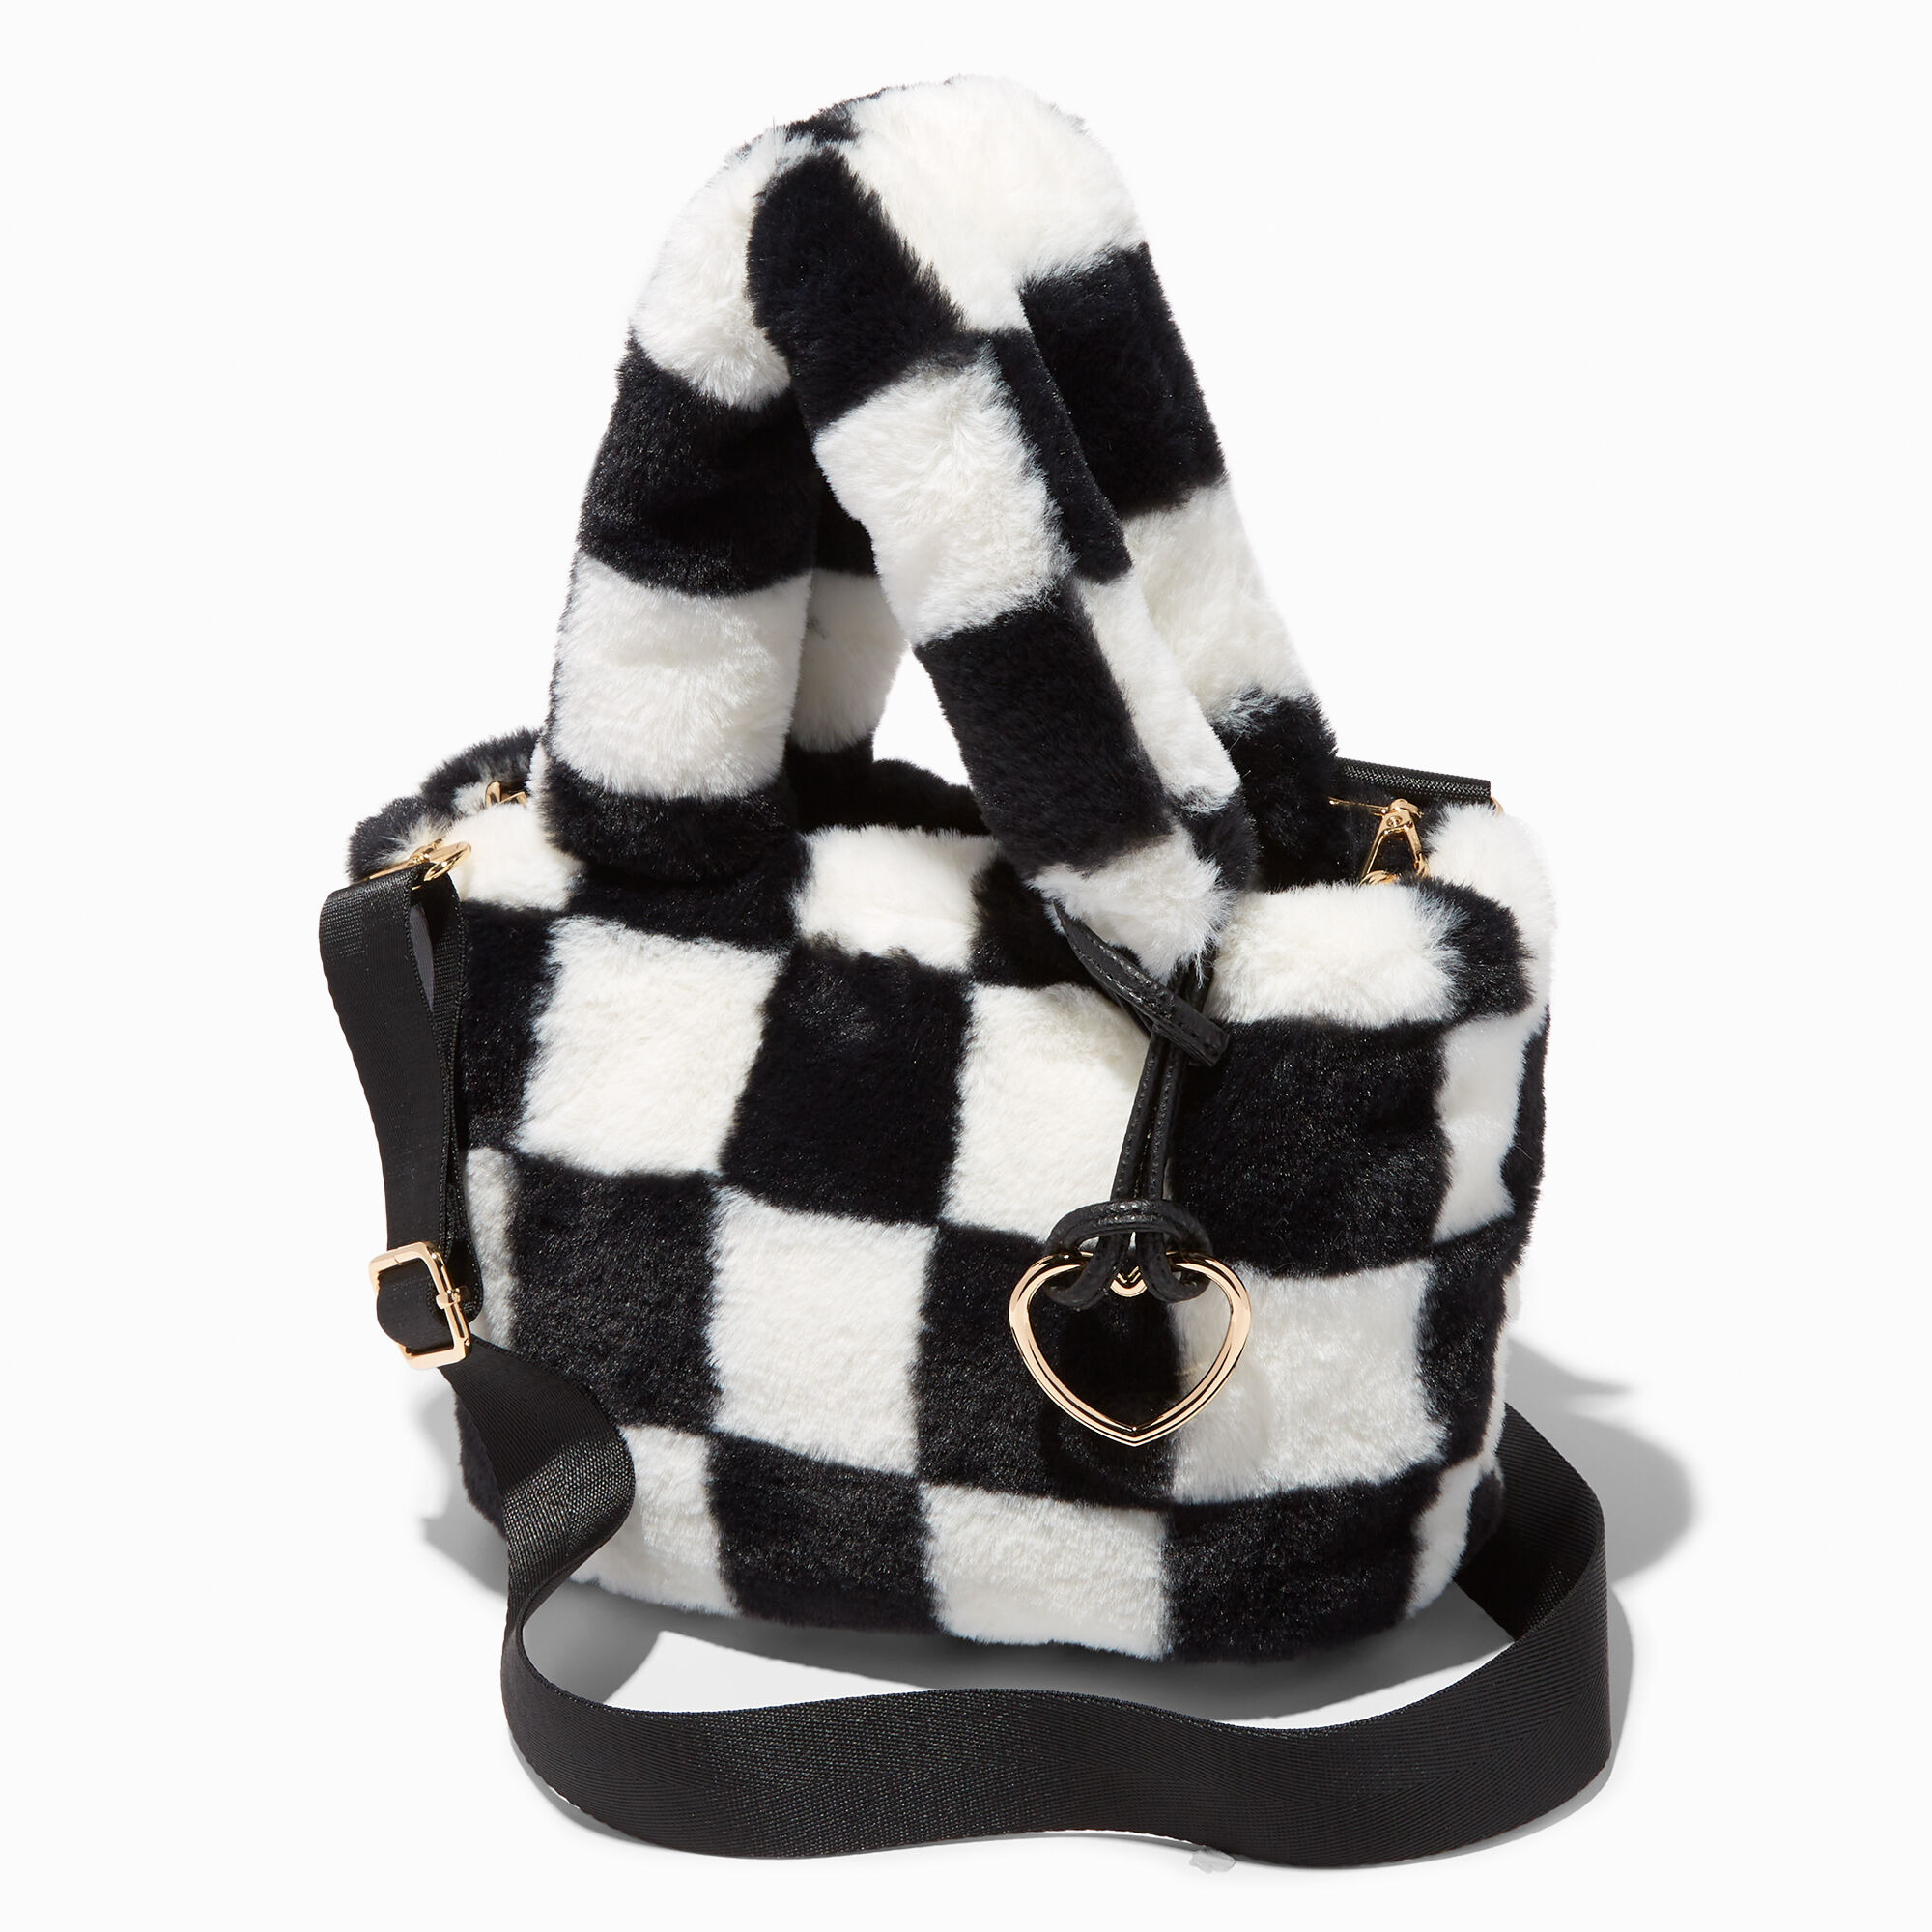 View Claires Black Checkerboard Furry Crossbody Tote Bag White information